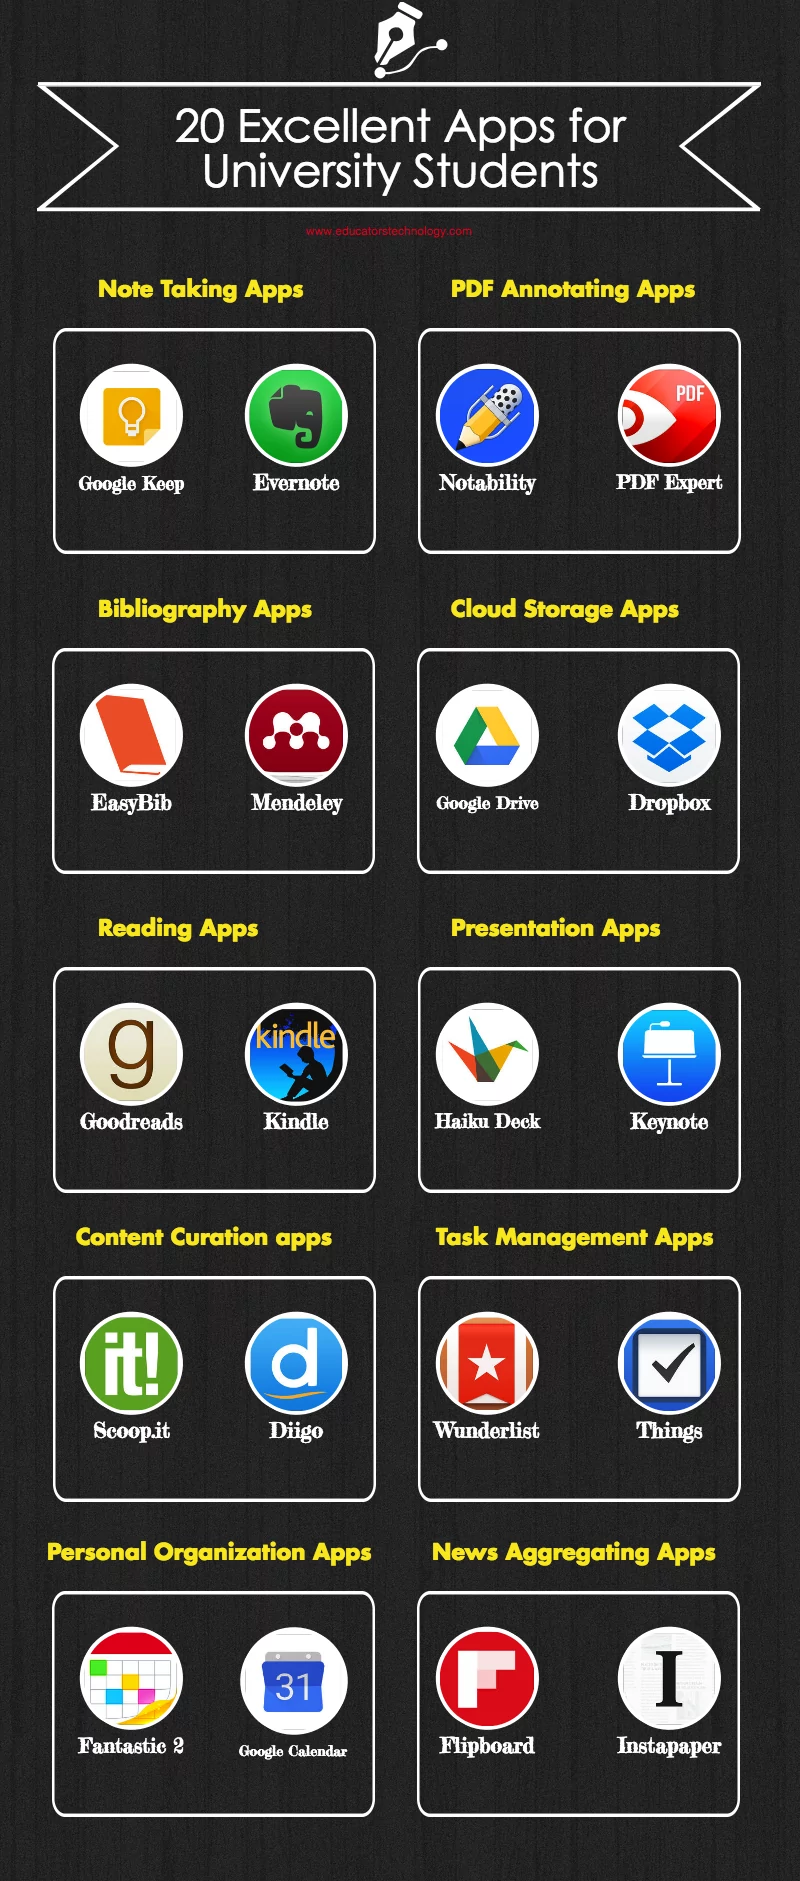 20 Excellent Apps for University Students